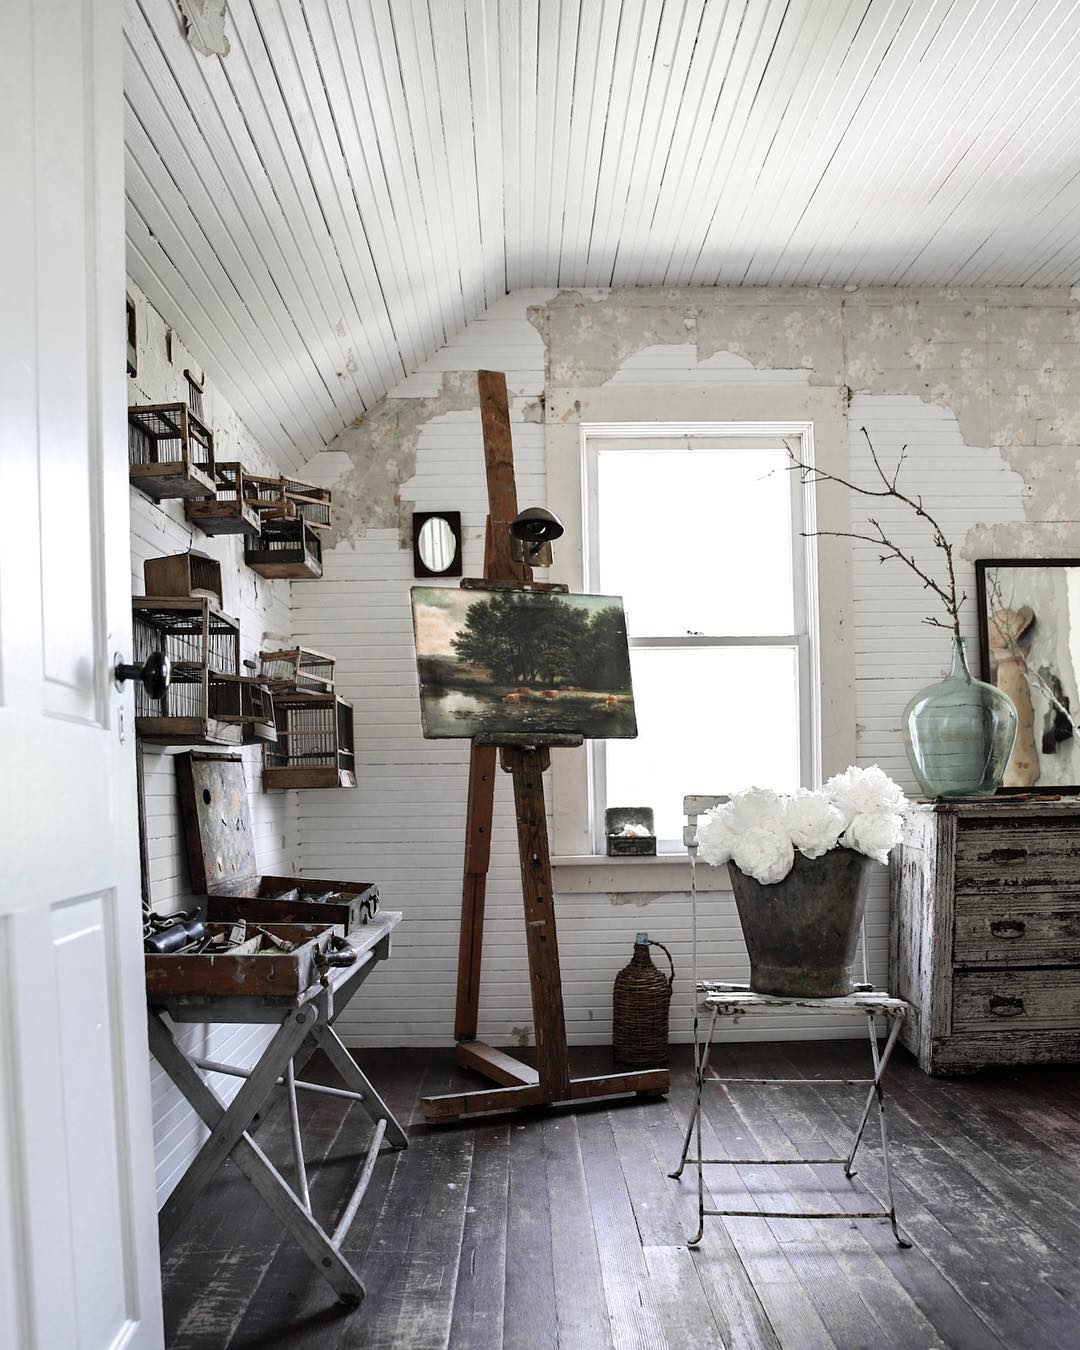 How to Create Your Own Art Studio